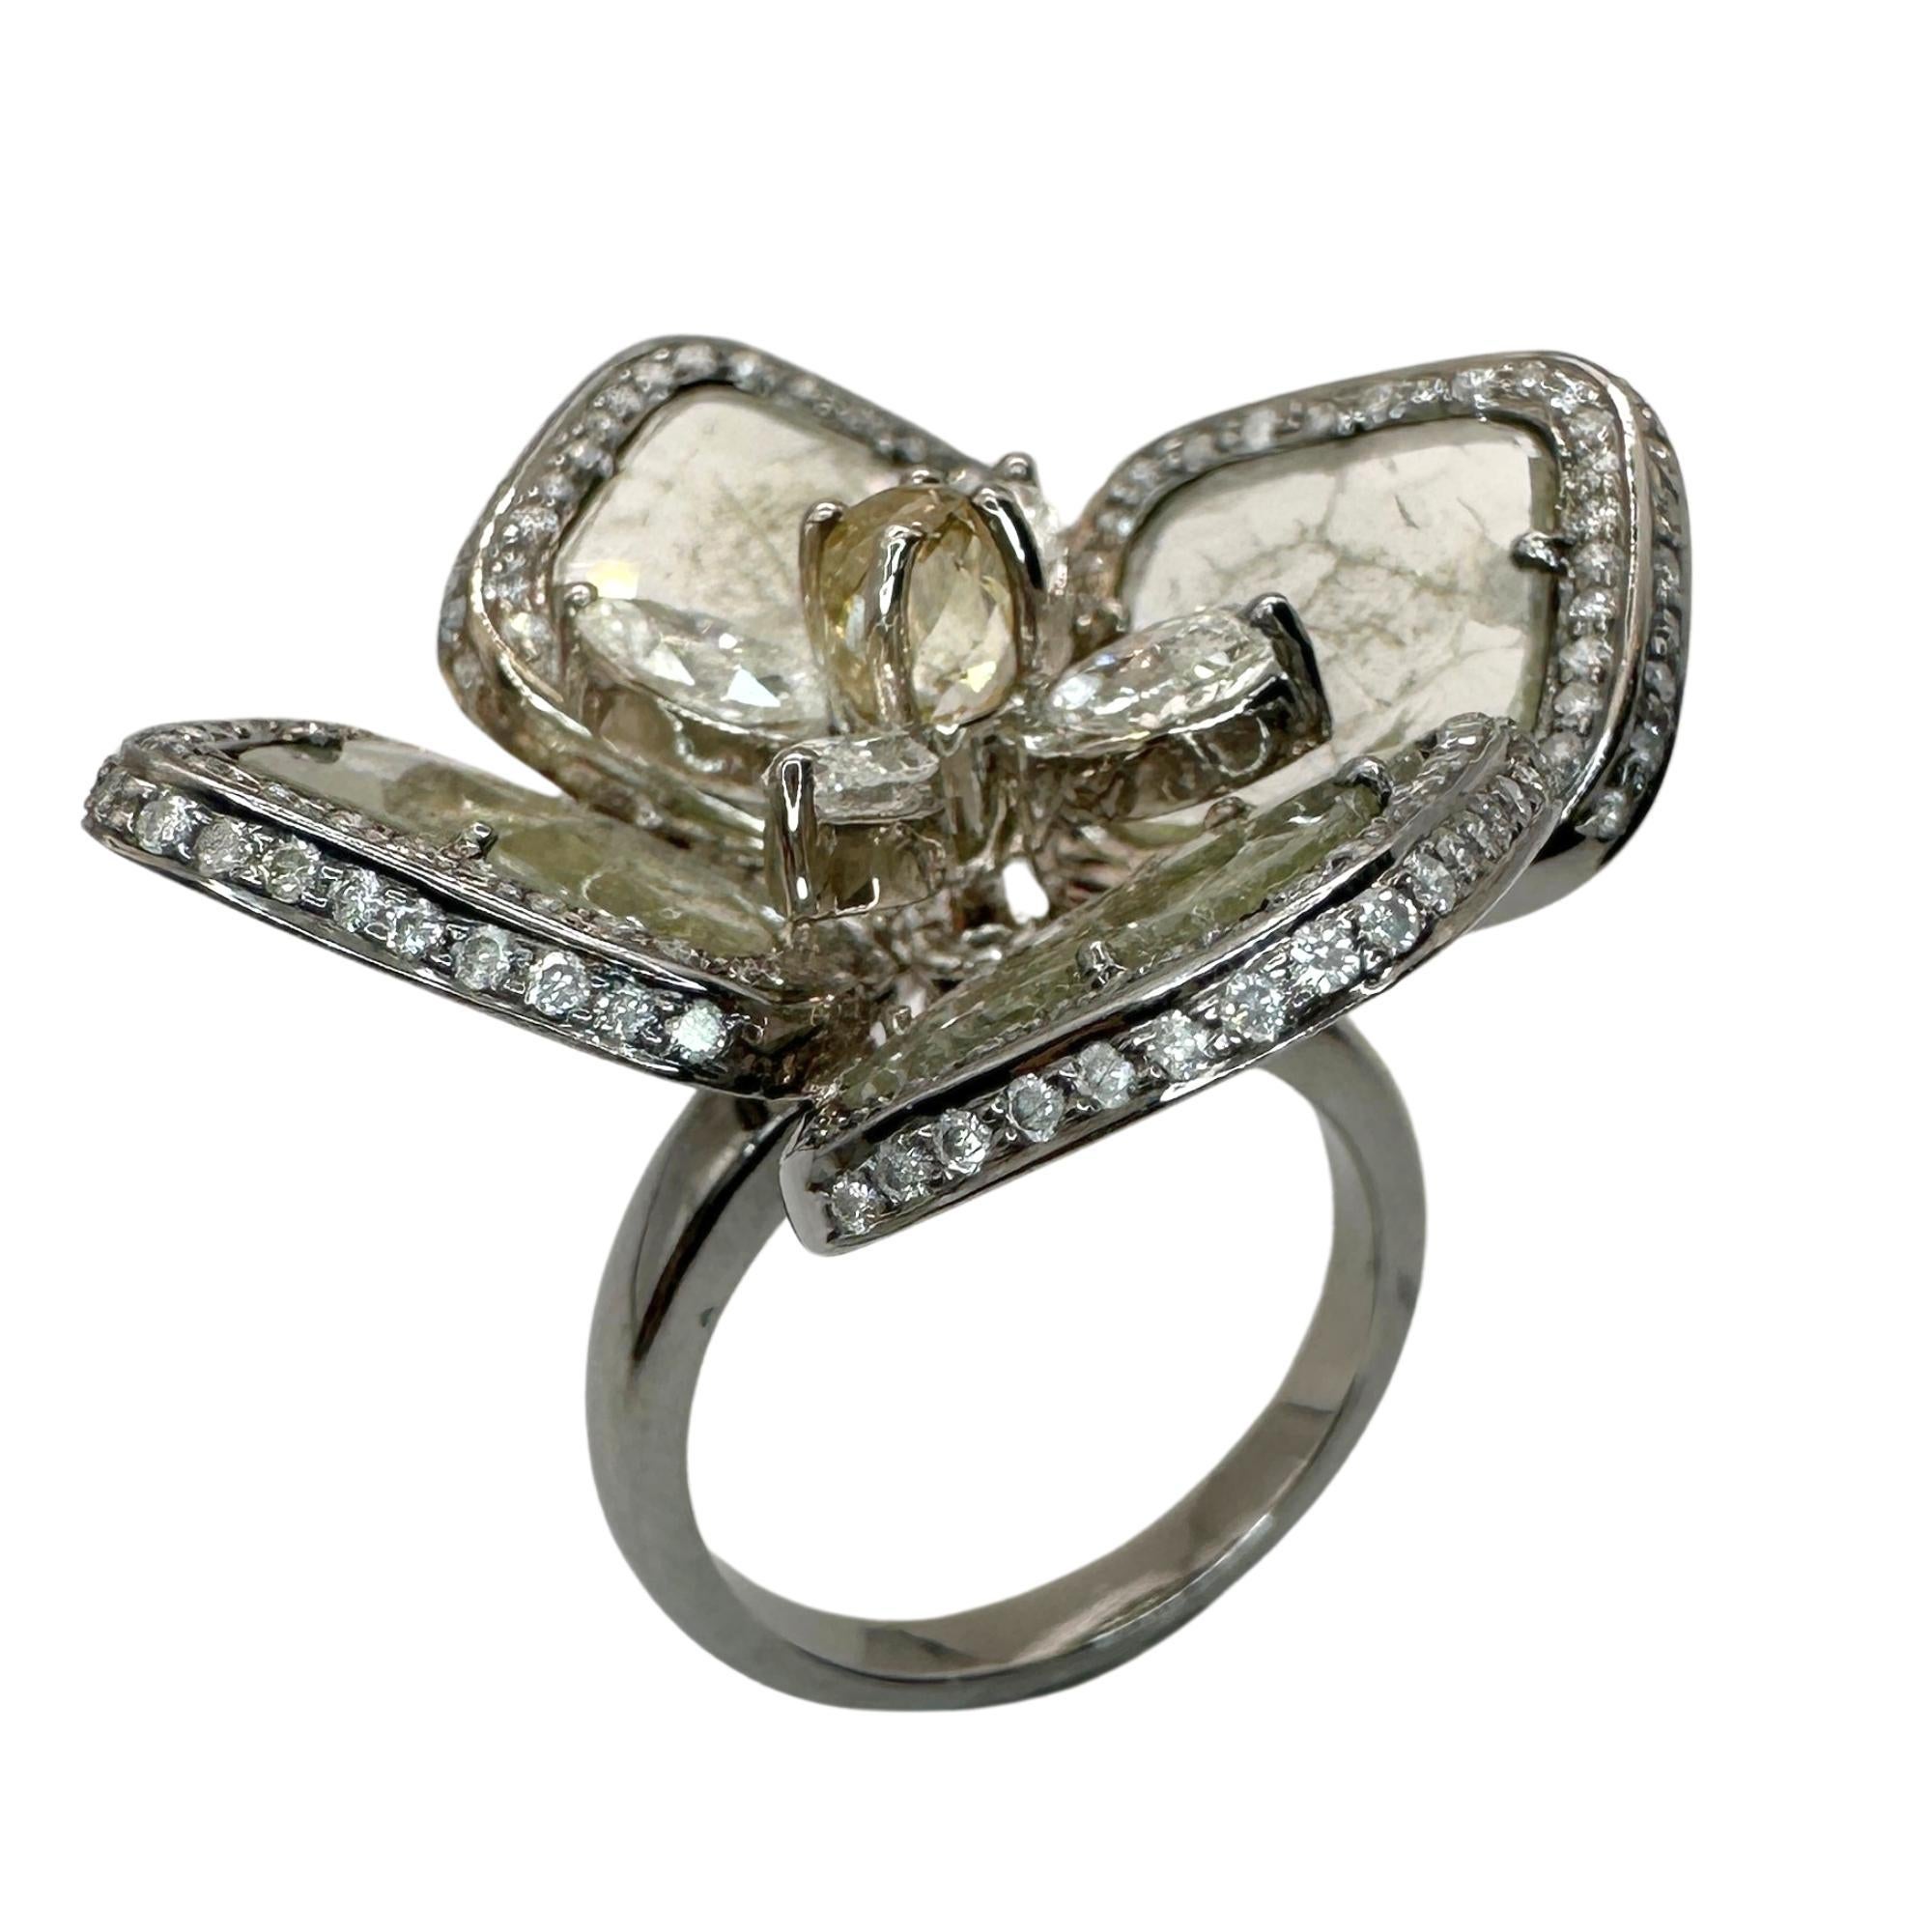 Indulge in luxury with our 14k All Natural Diamond Flower Cocktail Ring. Adorned with 8.25 carats of sparkling all natural diamonds, set in 14k white gold, this ring exudes elegance and sophistication. In good condition with minor surface wear, it's